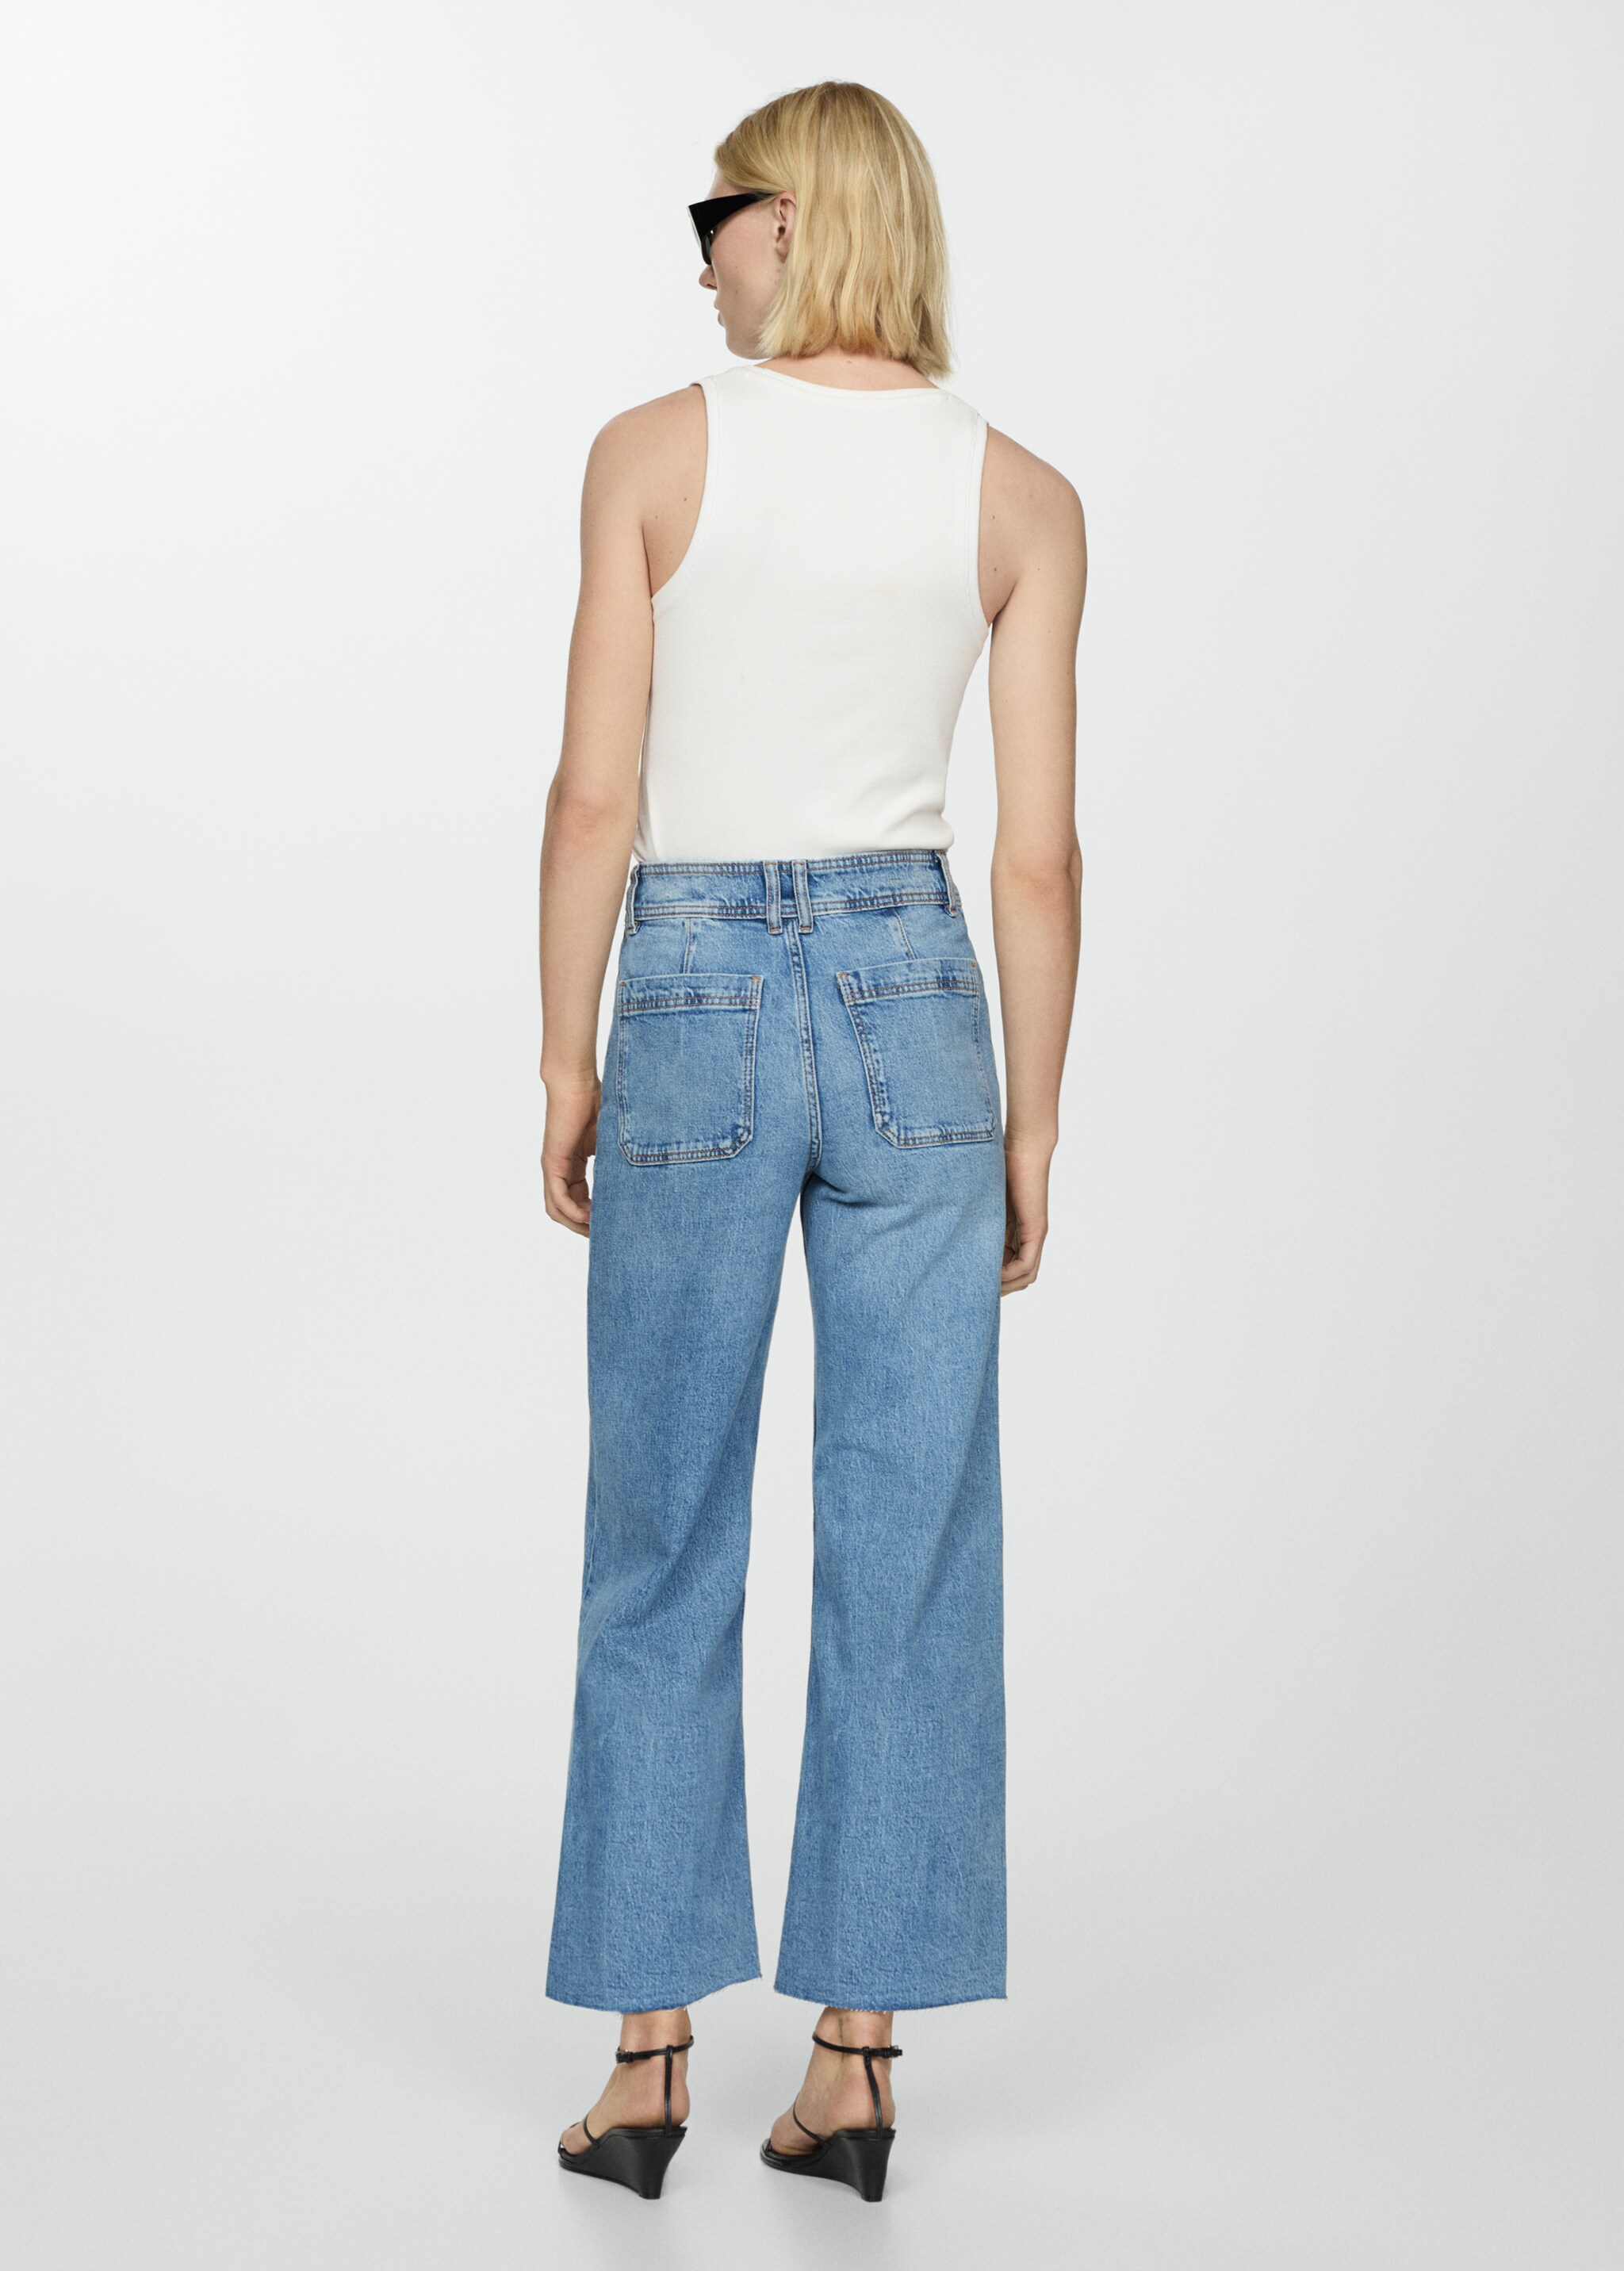 Catherin culotte high rise jeans - Reverse of the article